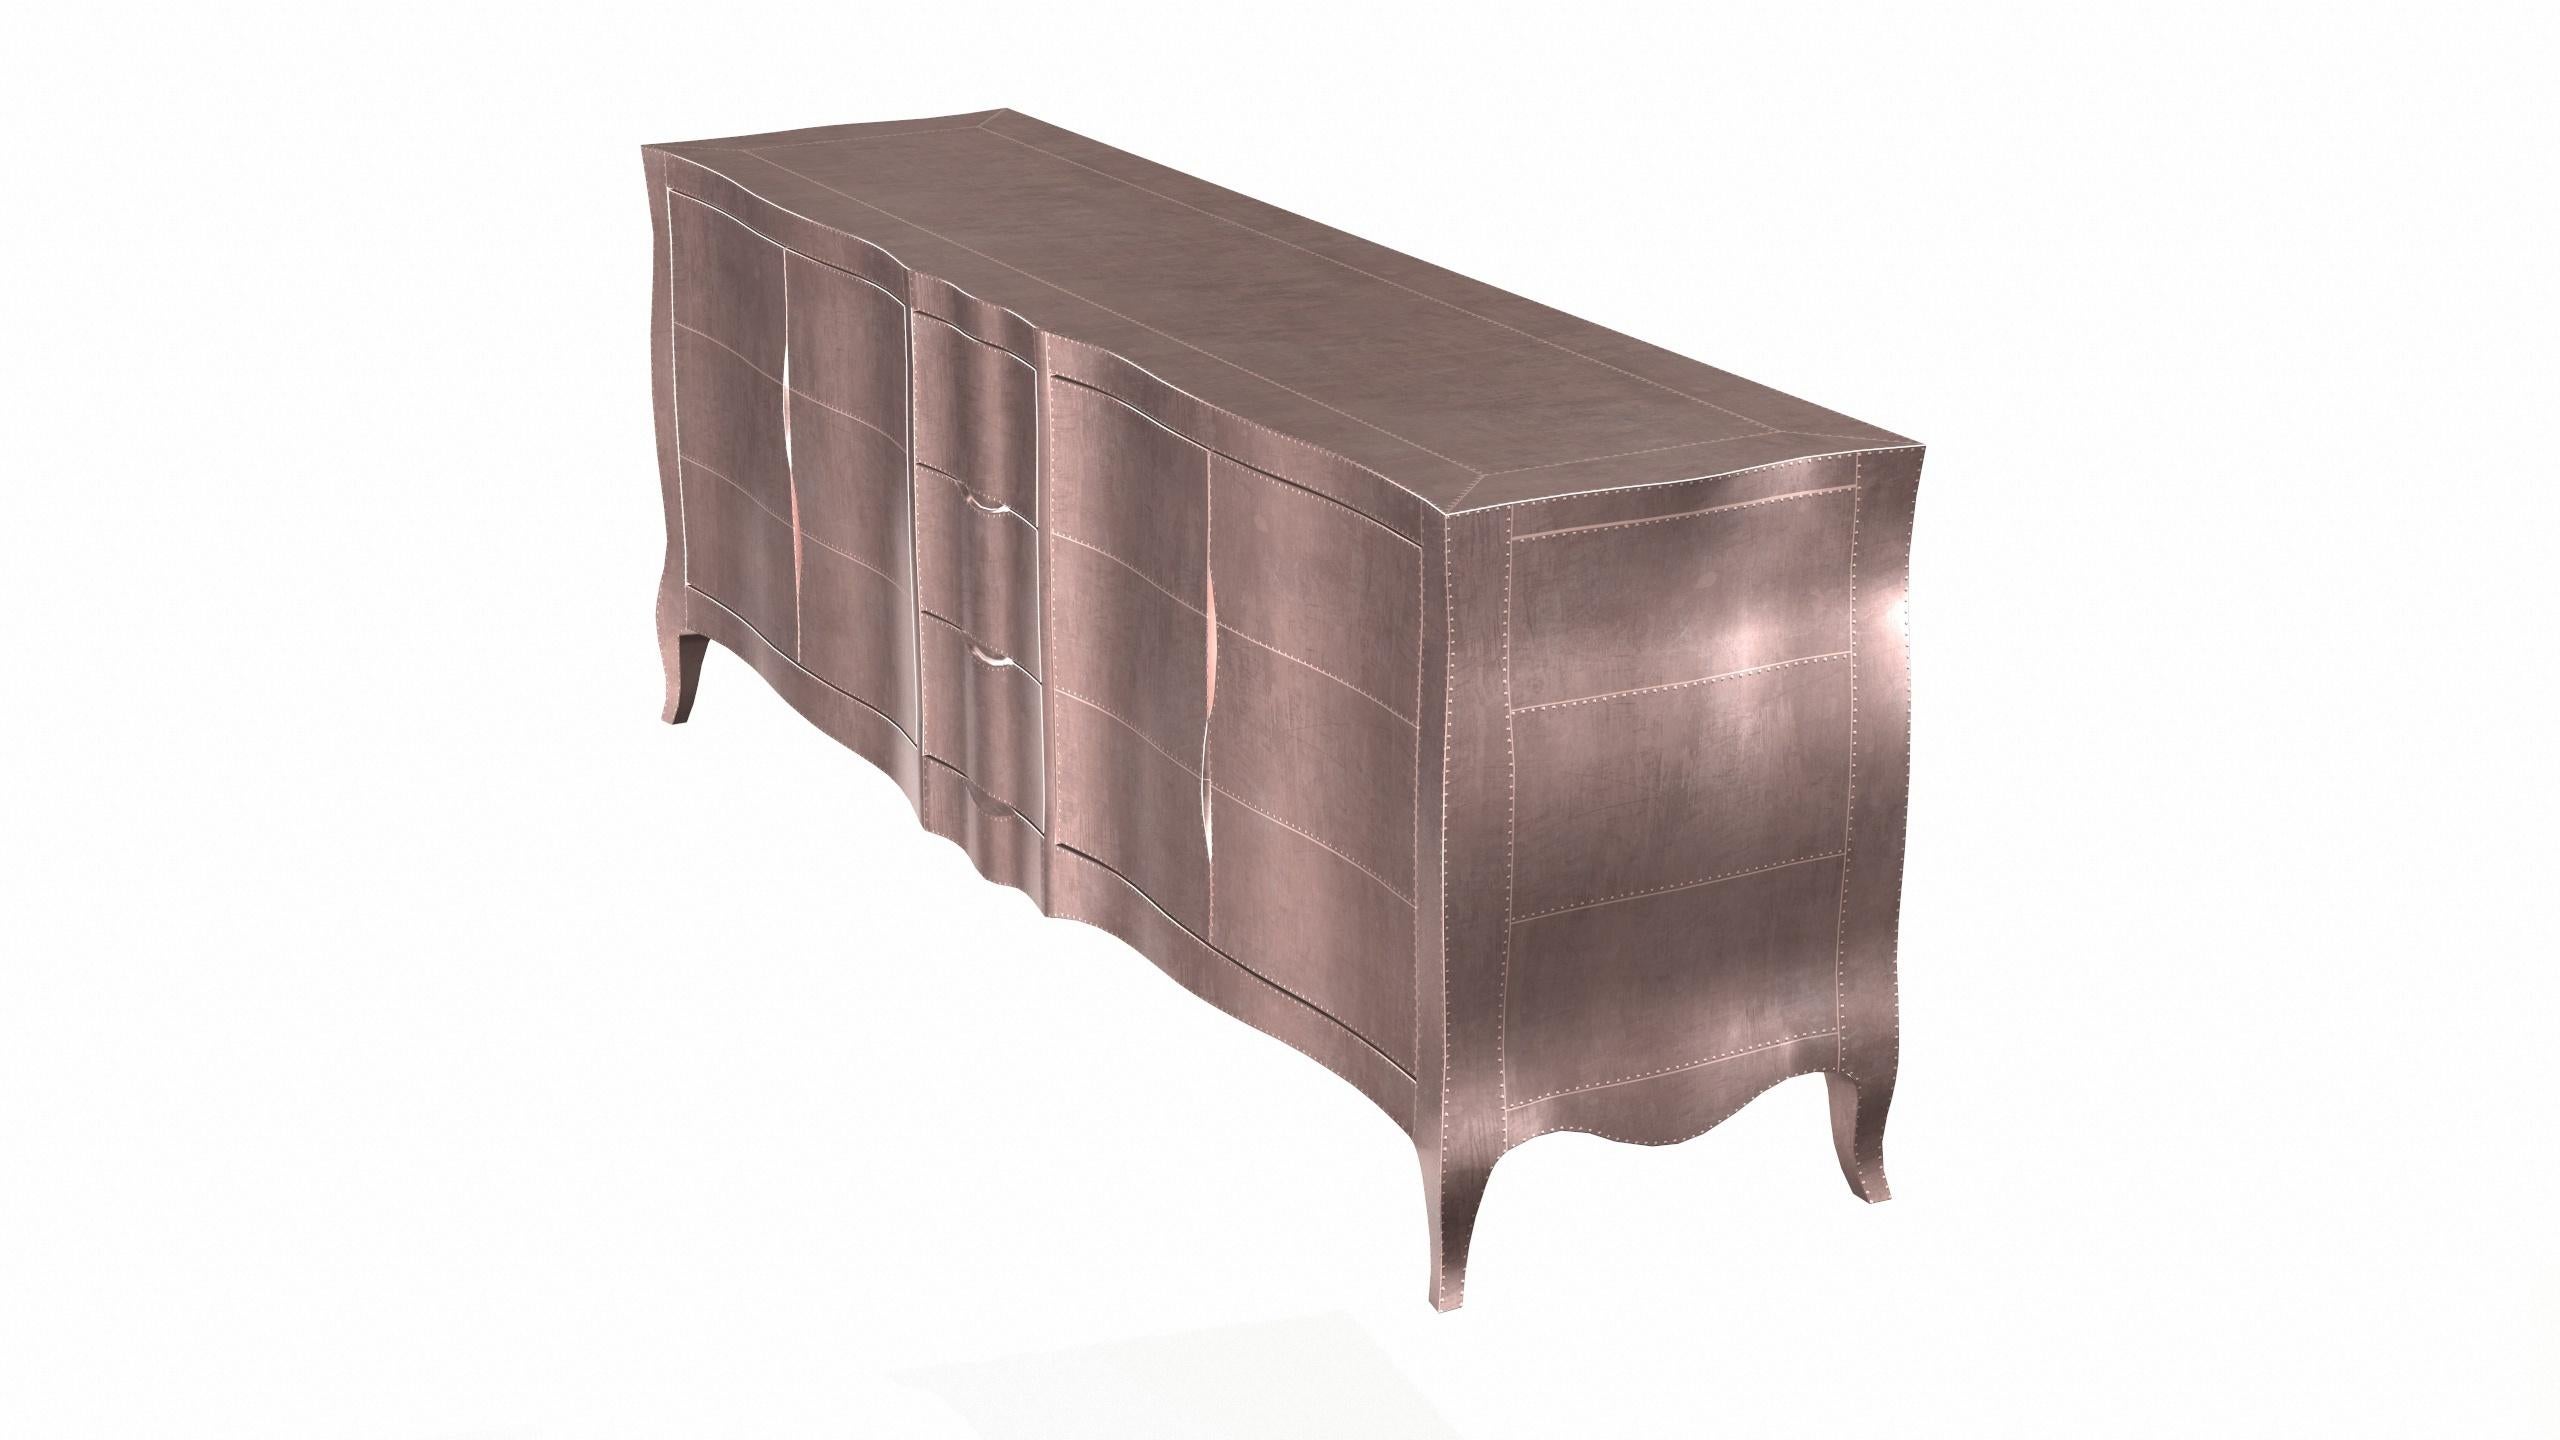 Hand-Carved Louise Credenza Art Deco Credenza in Smooth Copper by Paul Mathieu for S Odegard For Sale